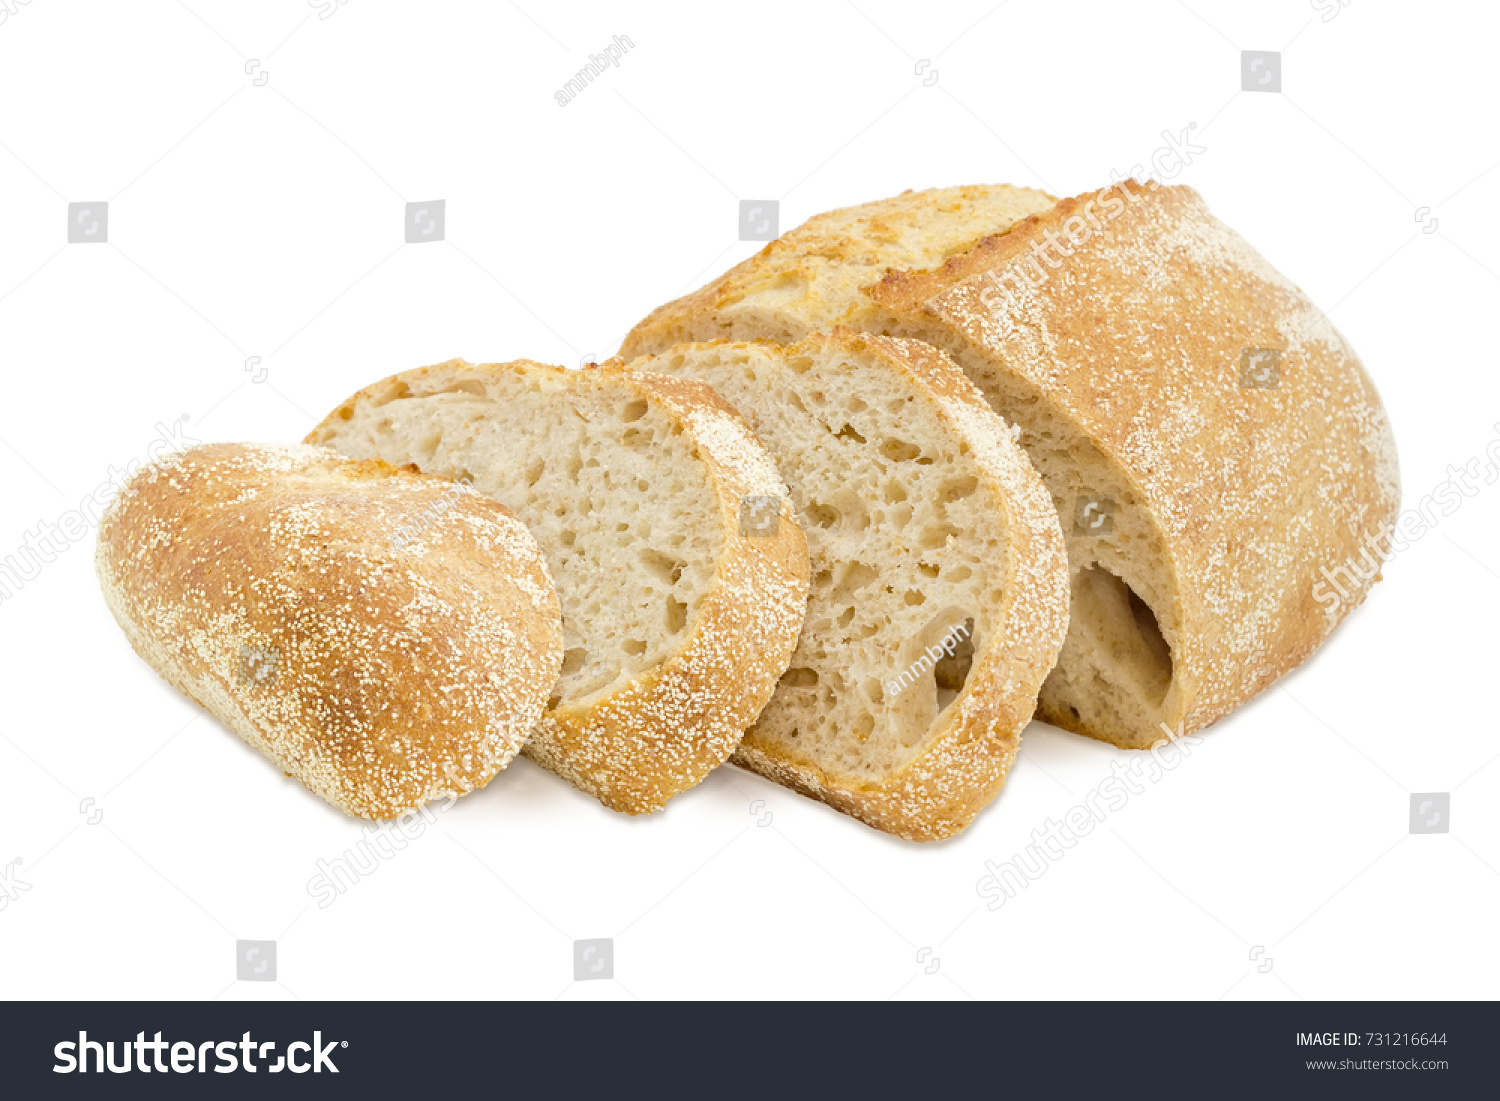 Partially sliced loaf of the wheat sourdough hearth bread with bran on a white background #731216644